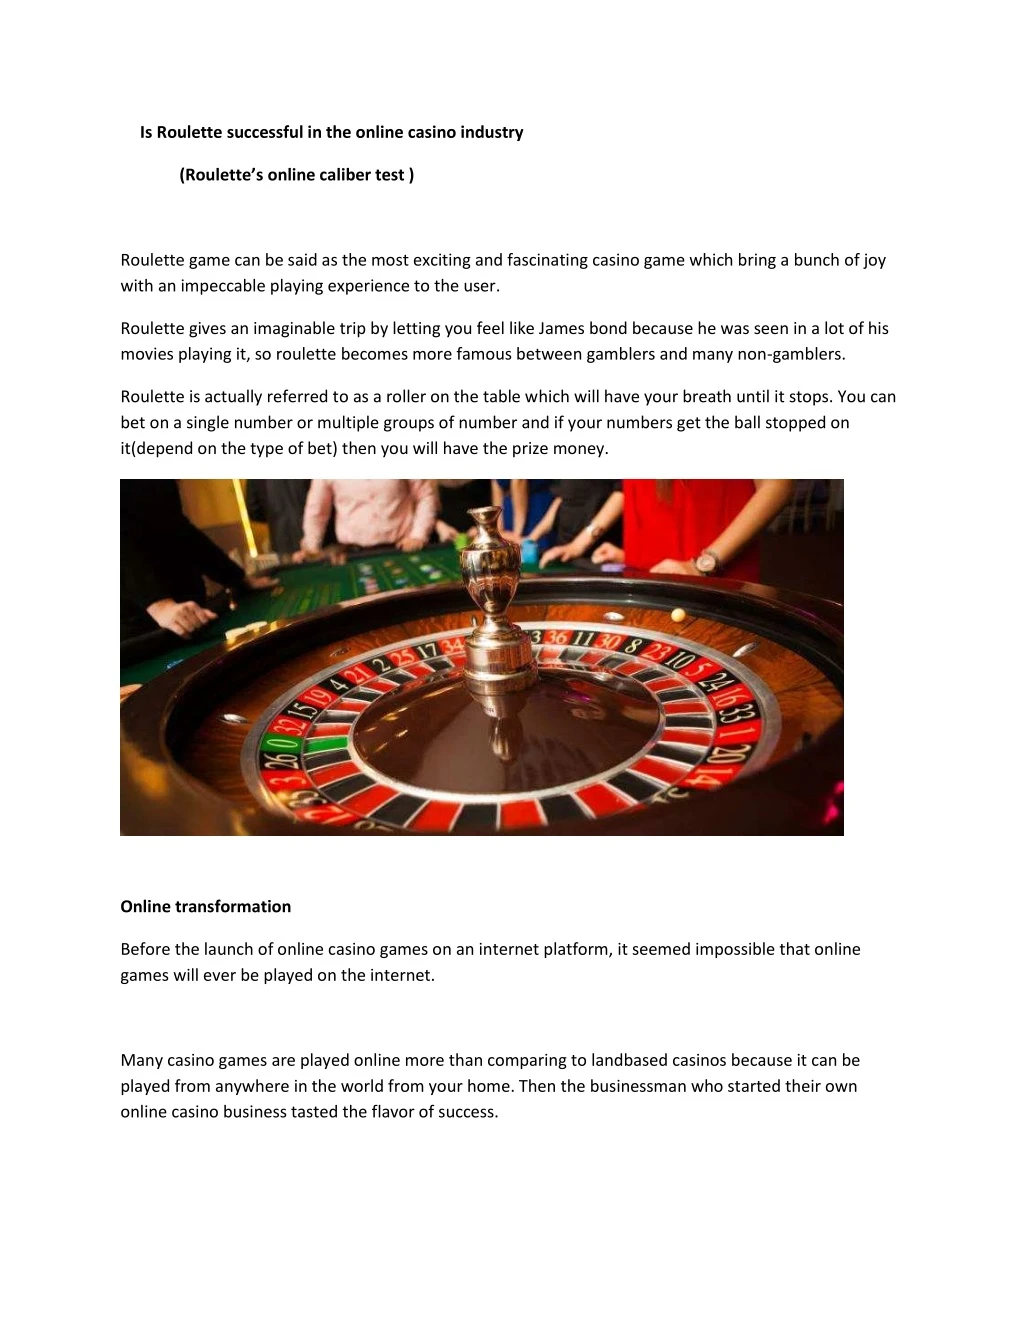 is roulette successful in the online casino